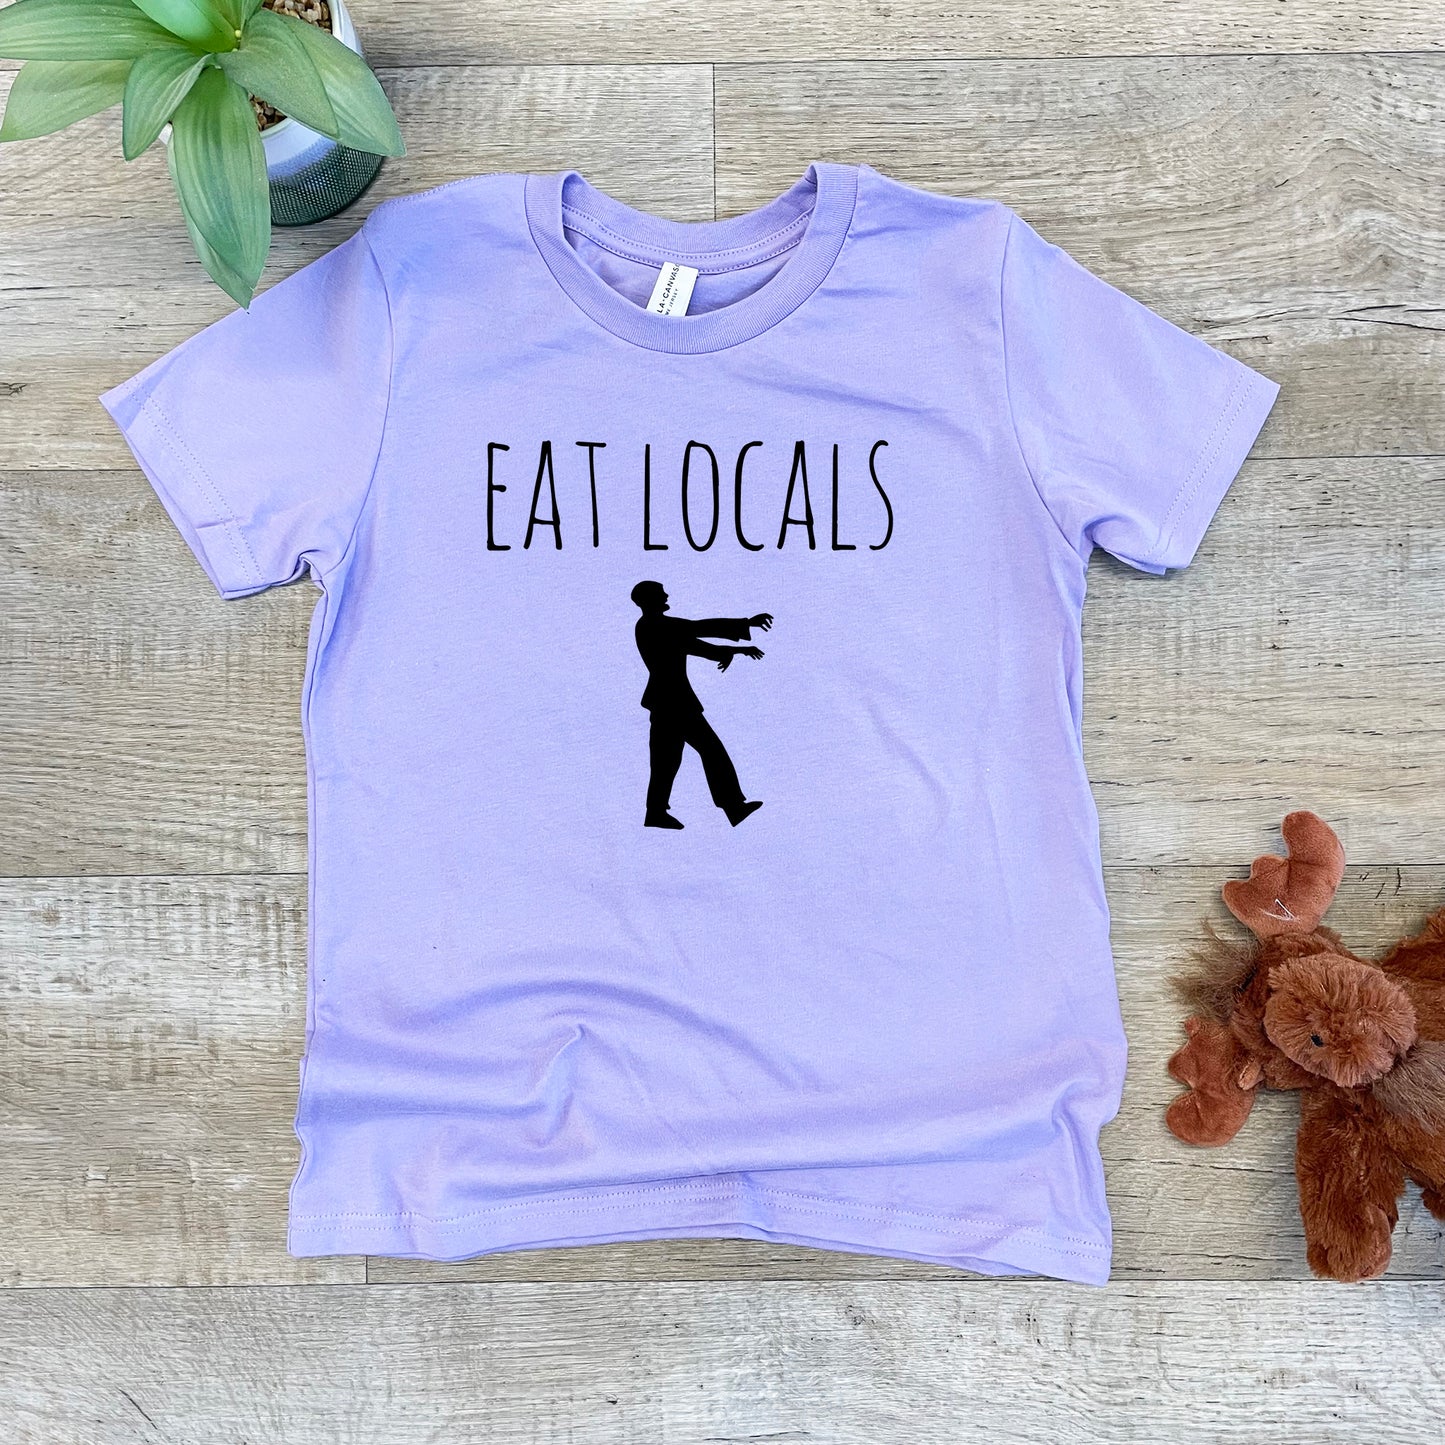 Eat Locals (Zombie) - Kid's Tee - Columbia Blue or Lavender